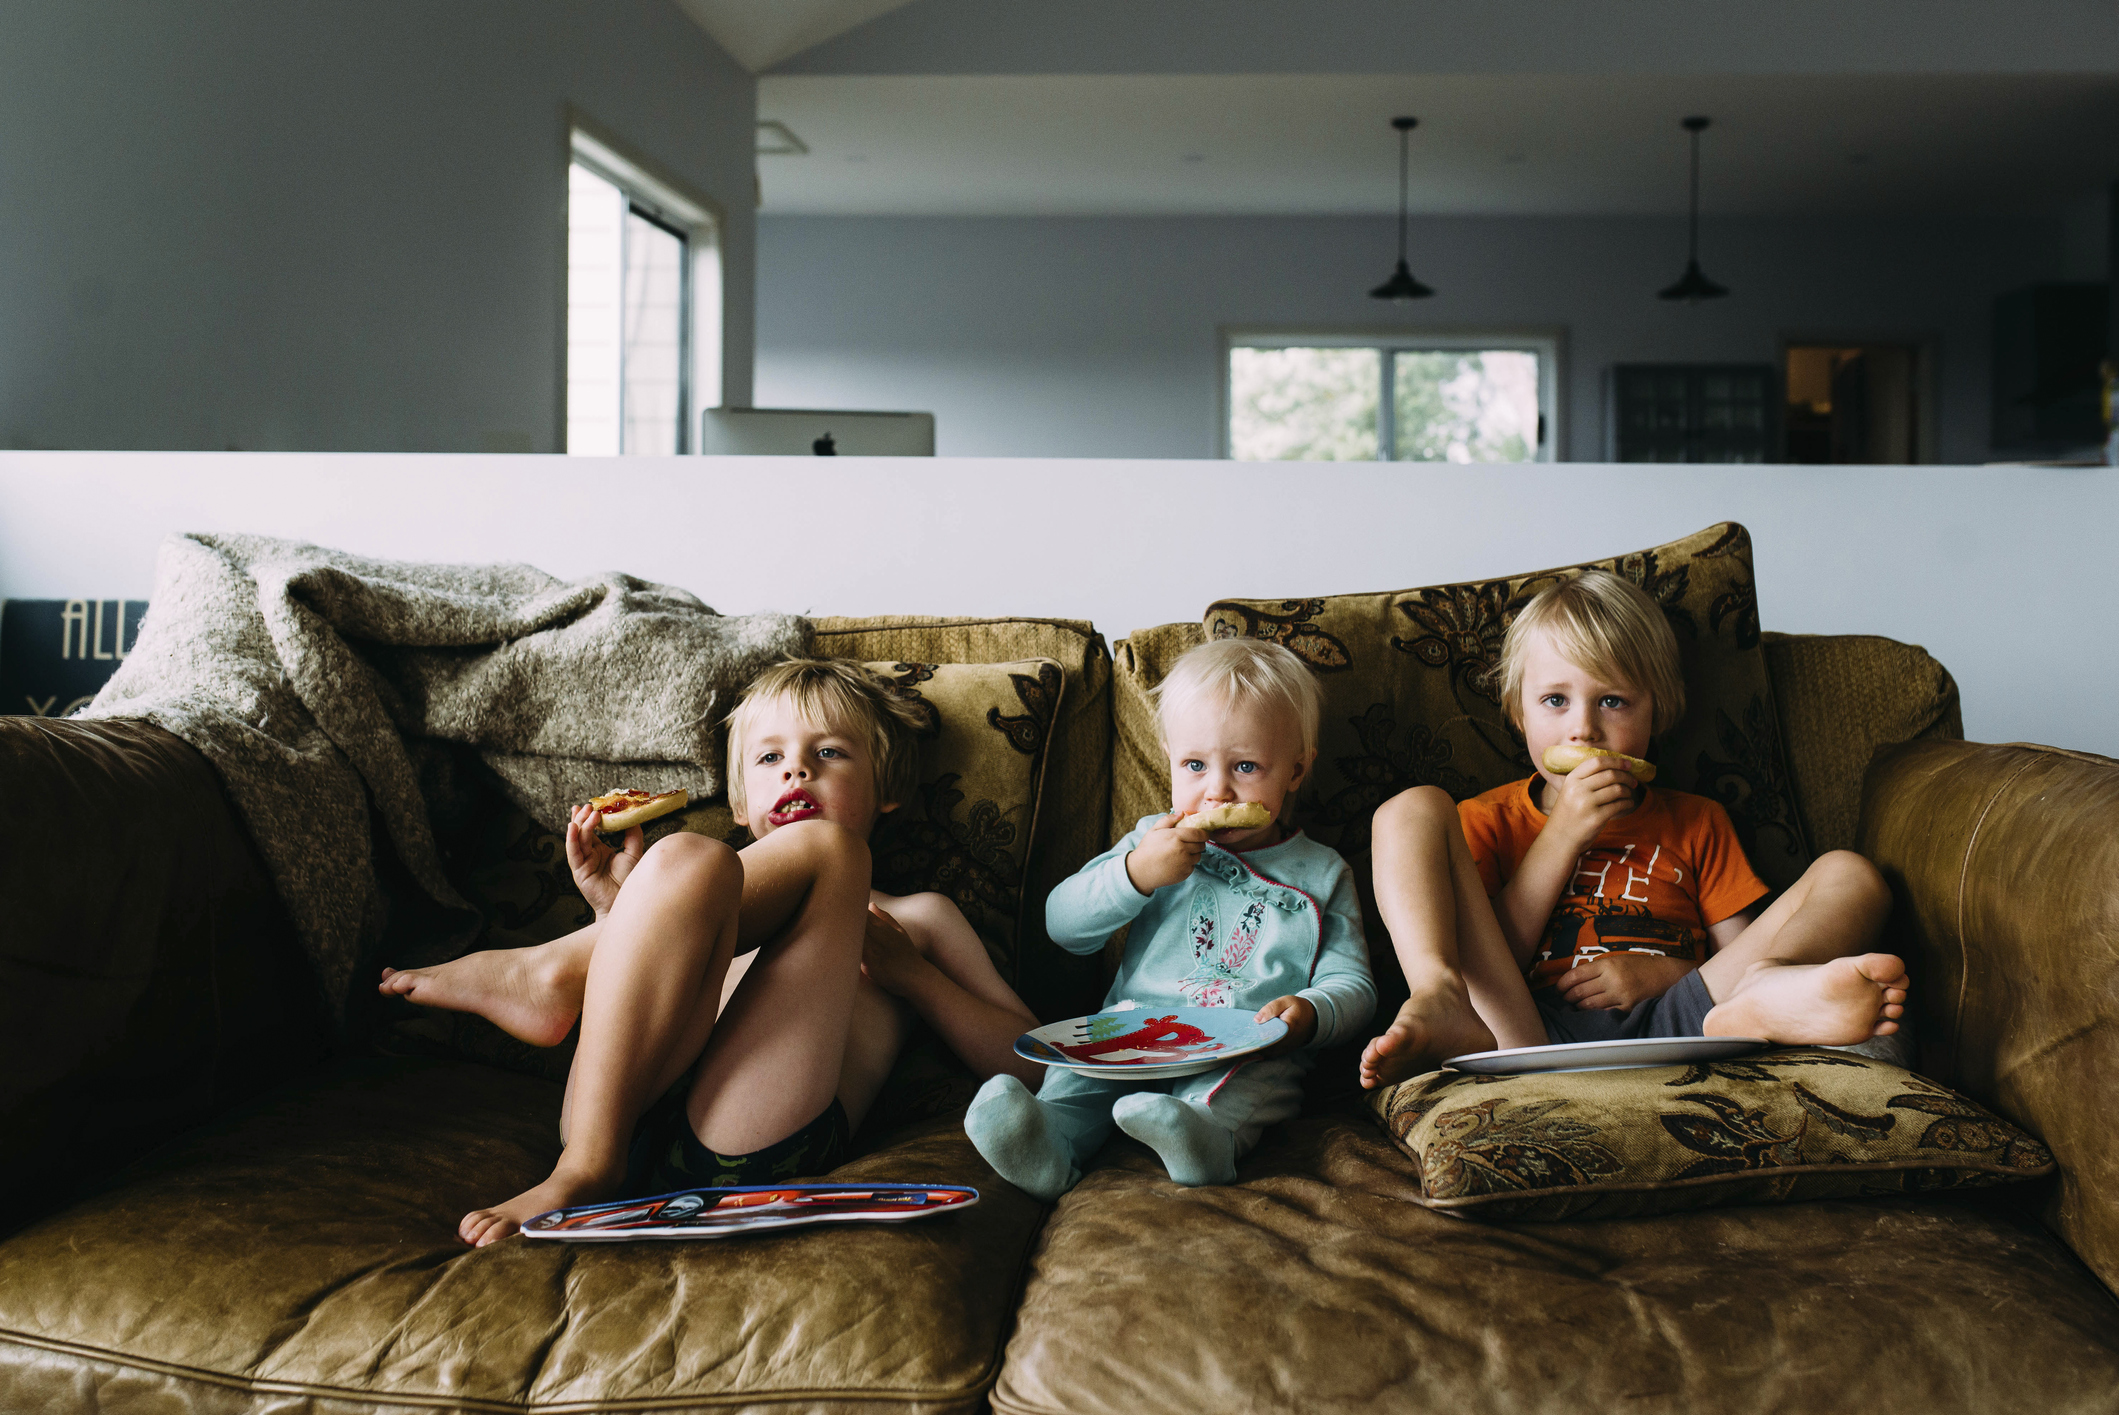 Siblings eating snacks watching TV while relaxing on sofa at home